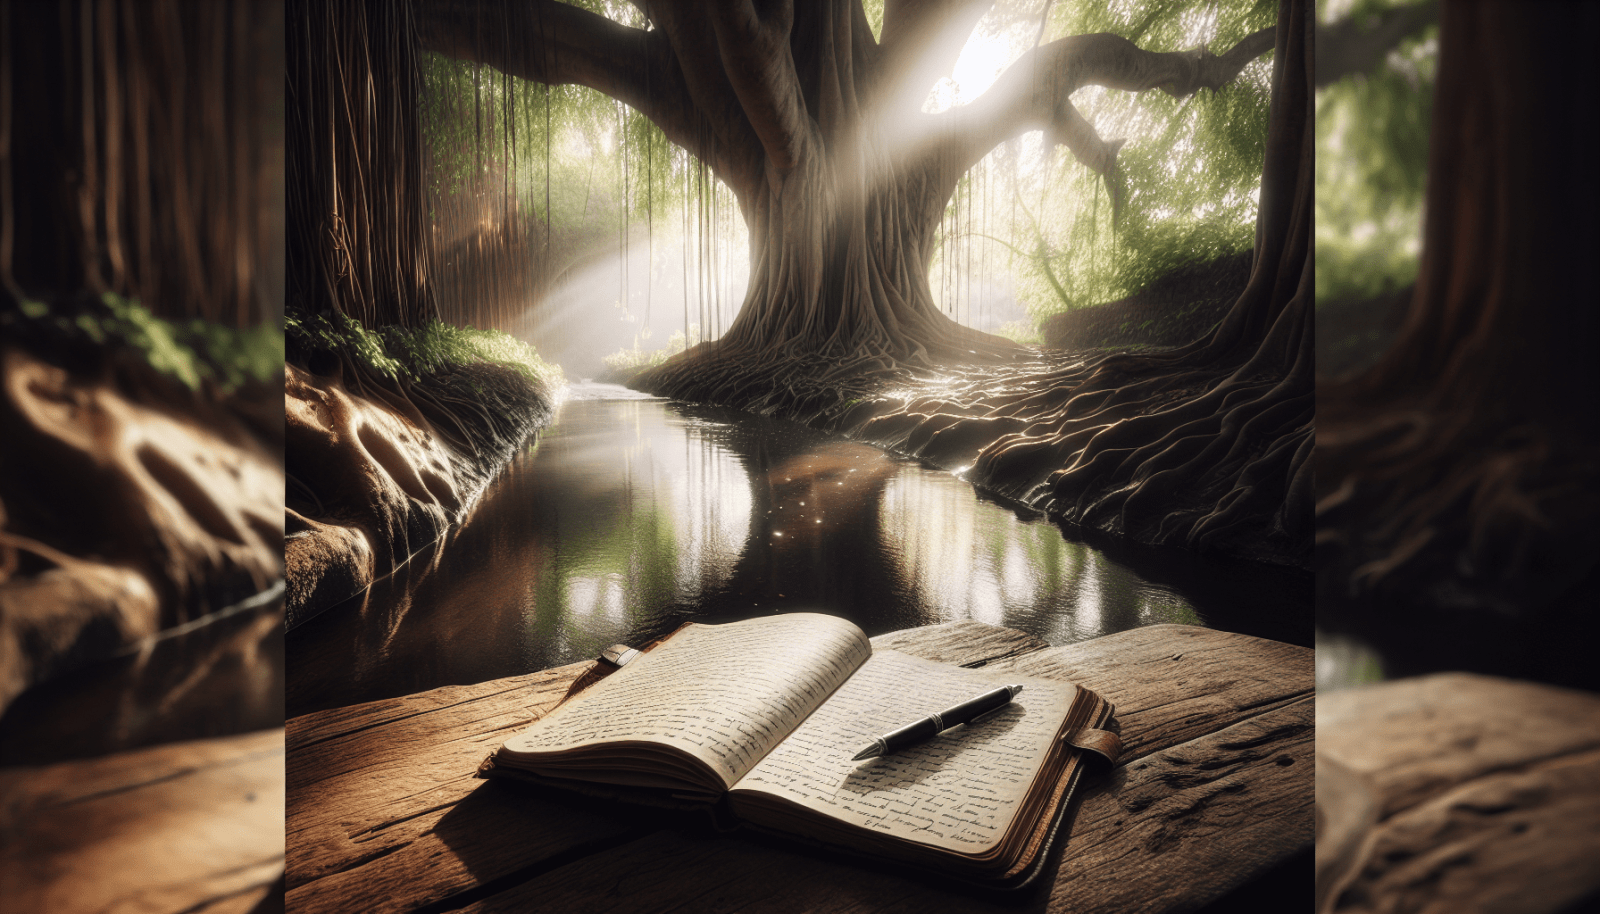 An open book with a pen on a wooden surface overlooking a mystical forest scene with a large tree, a reflective river, and sunrays filtering through the foliage.